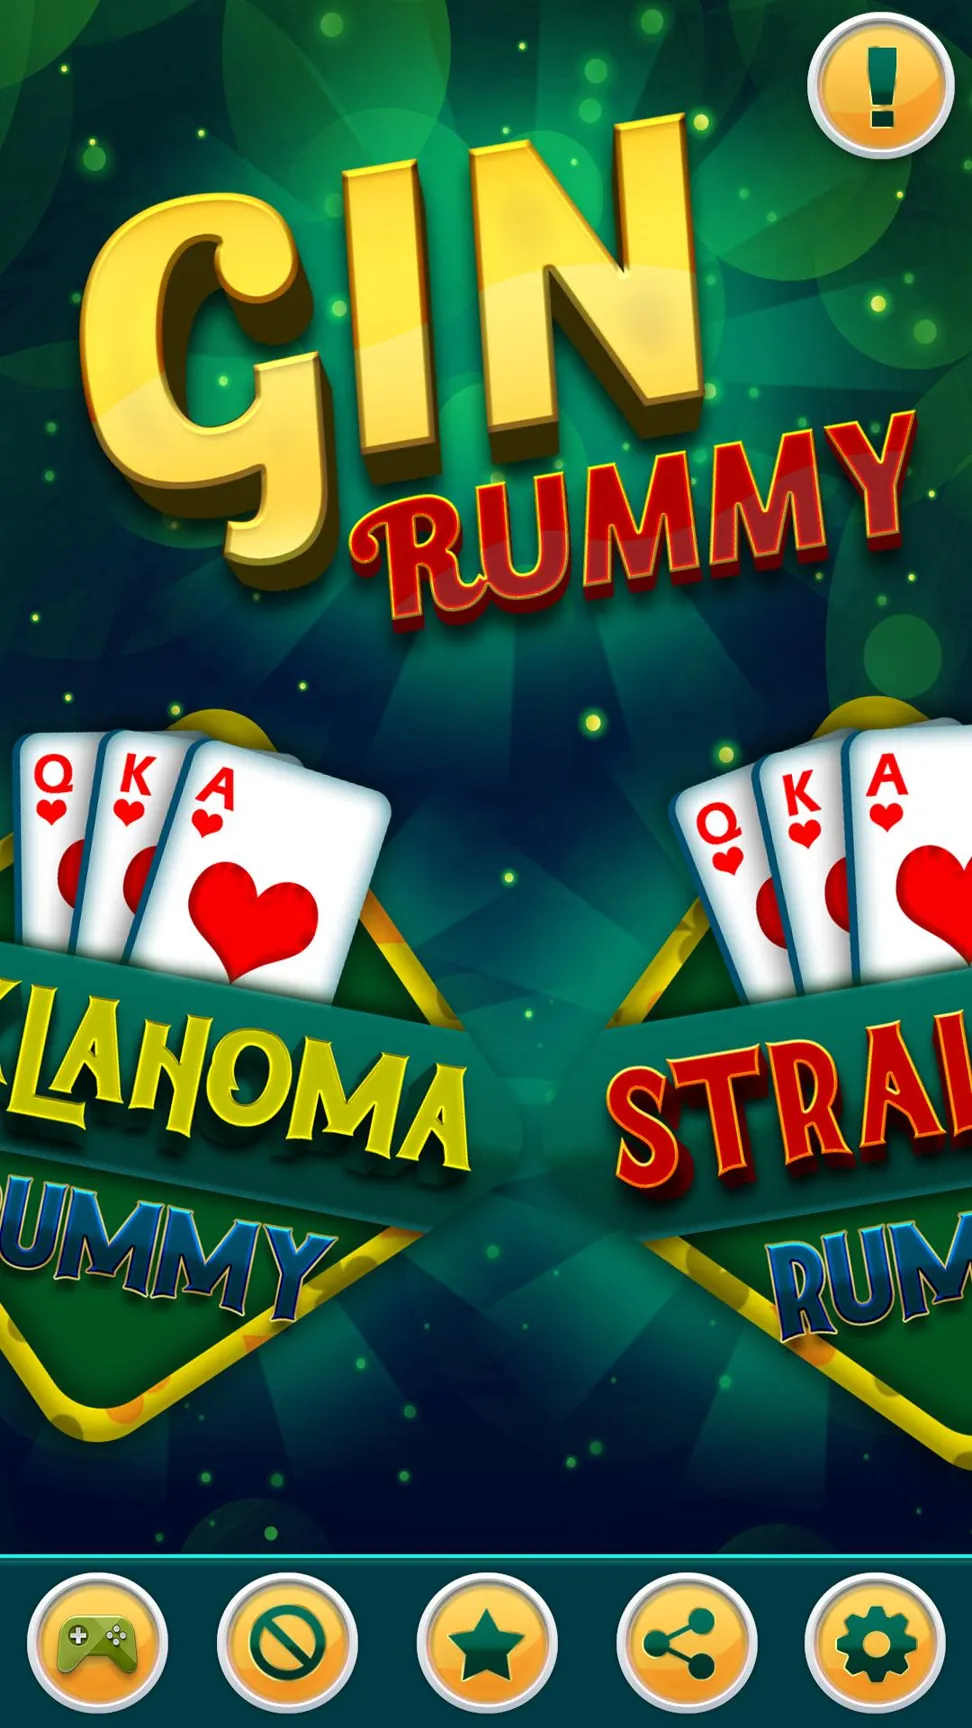 How about can you play rummy with 4 players?